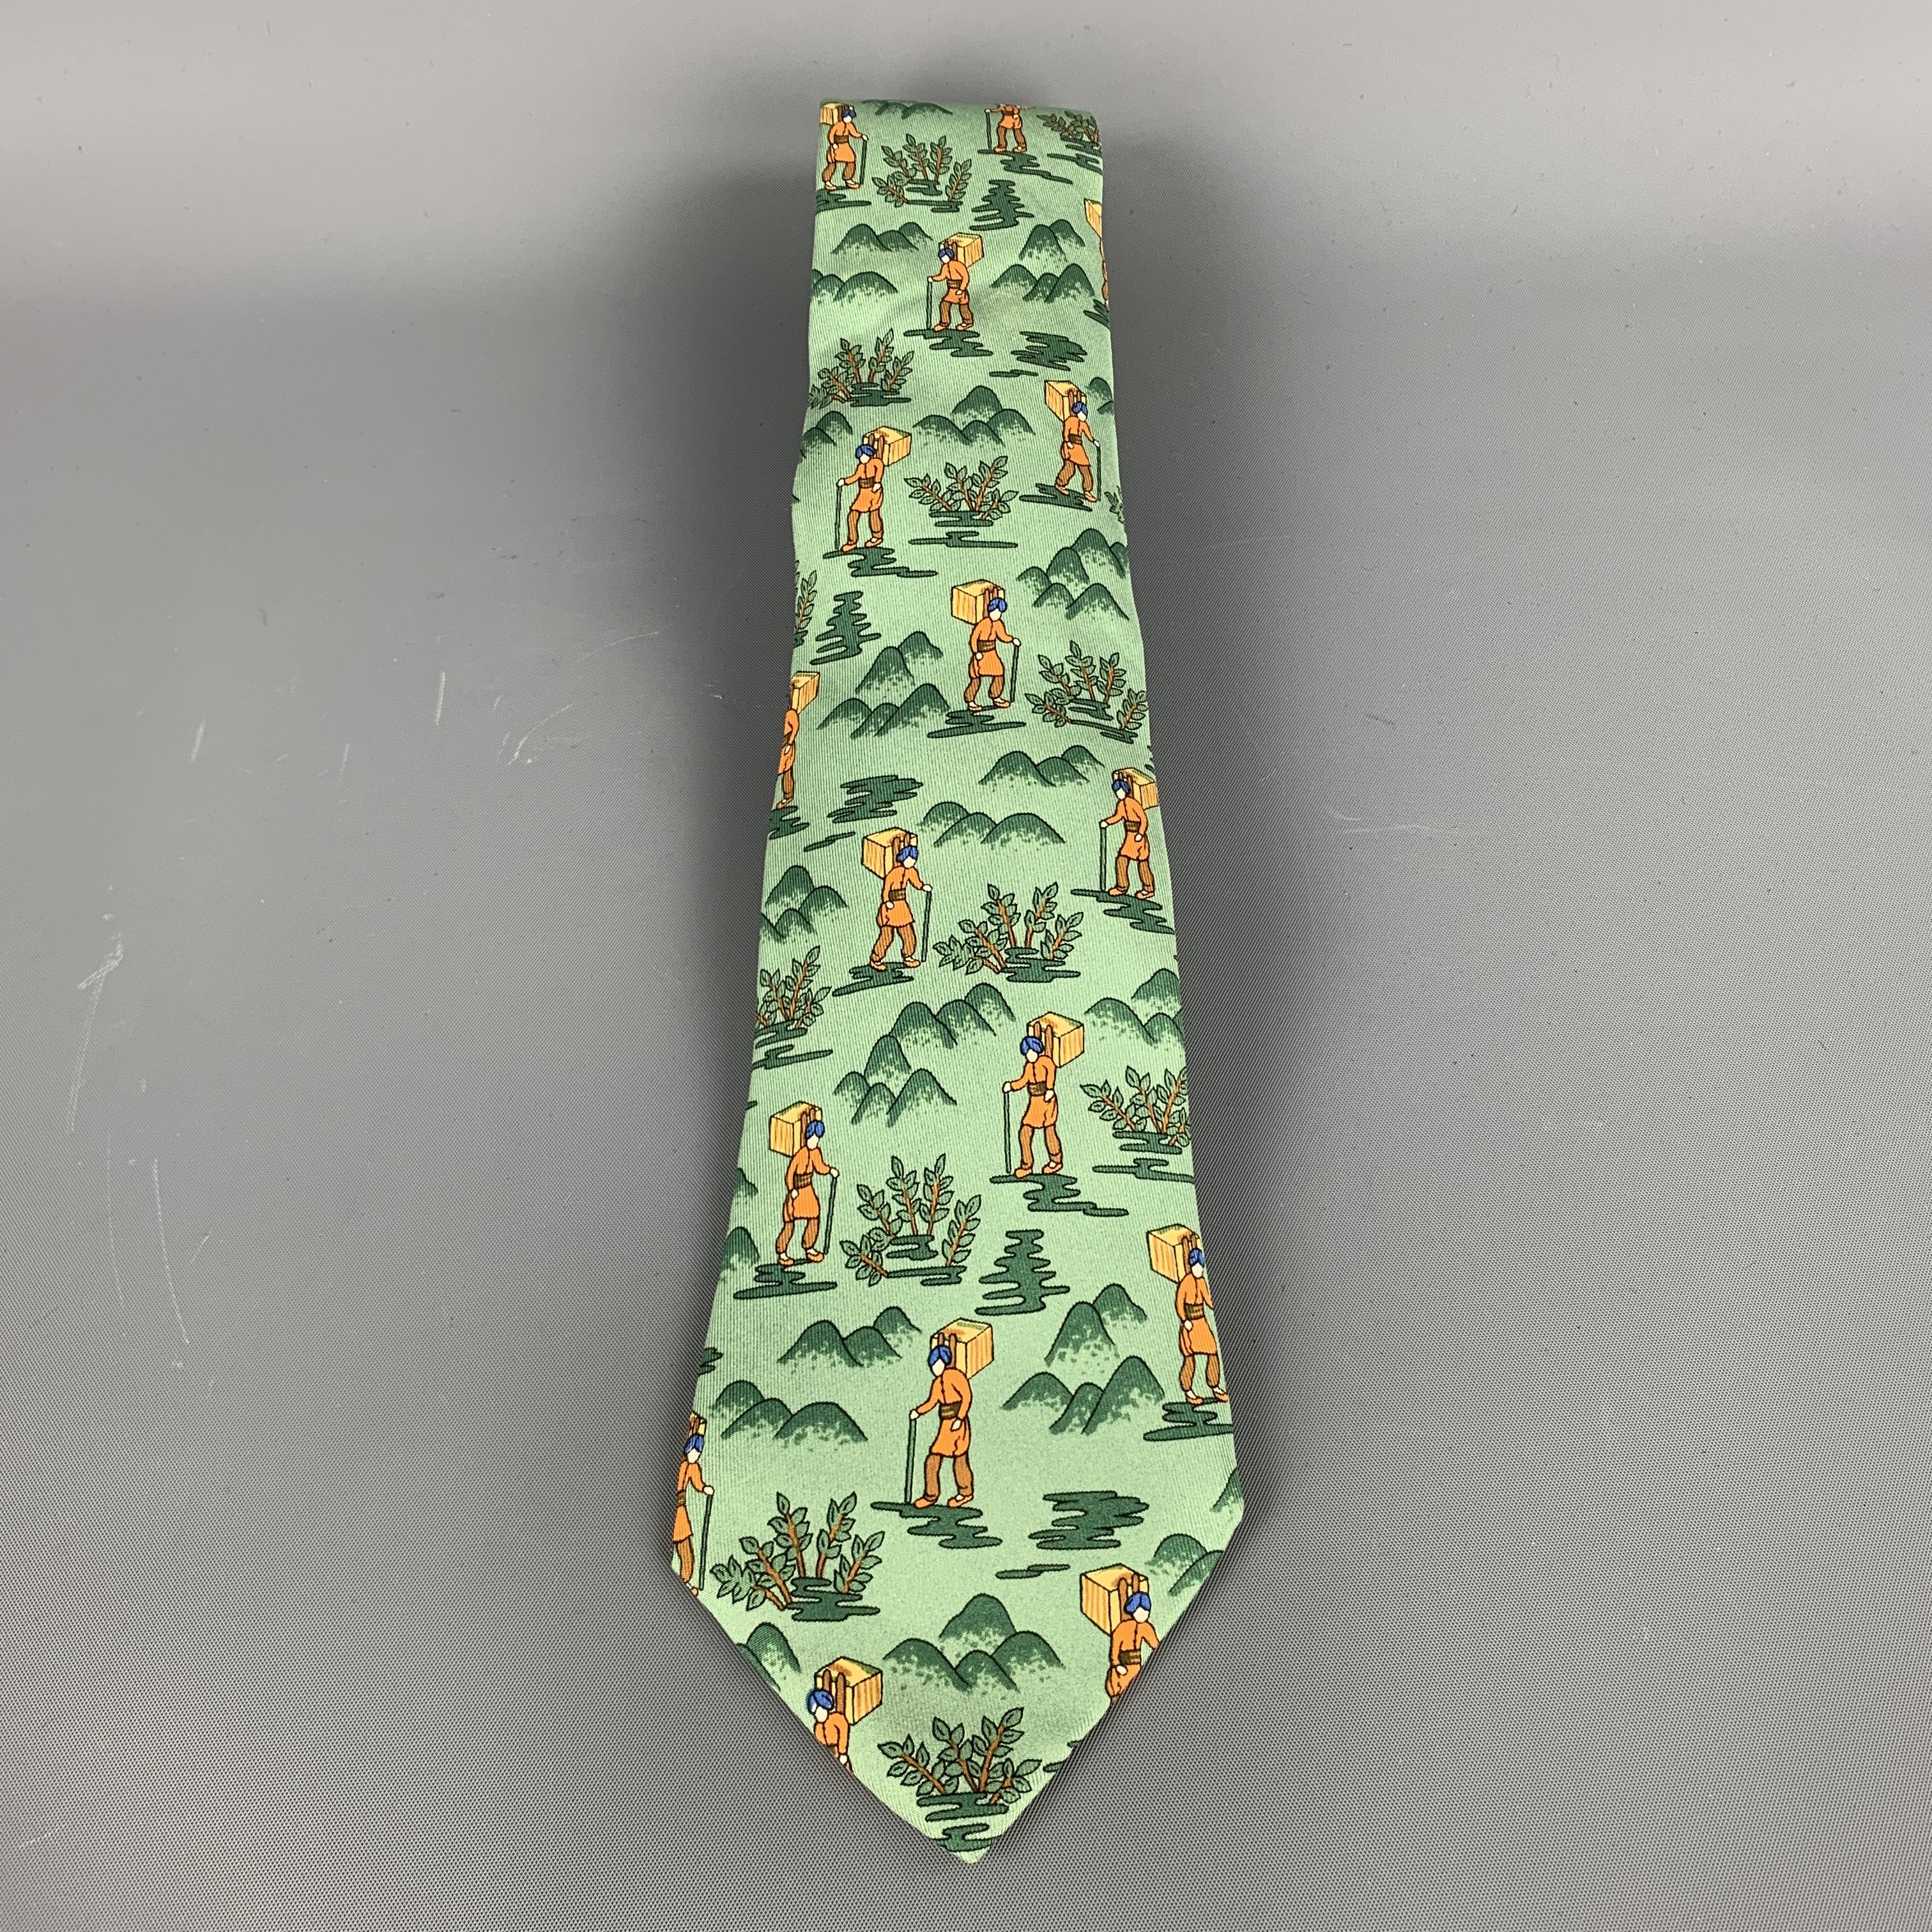 Vintage Hermes necktie comes in green silk twill with all over 